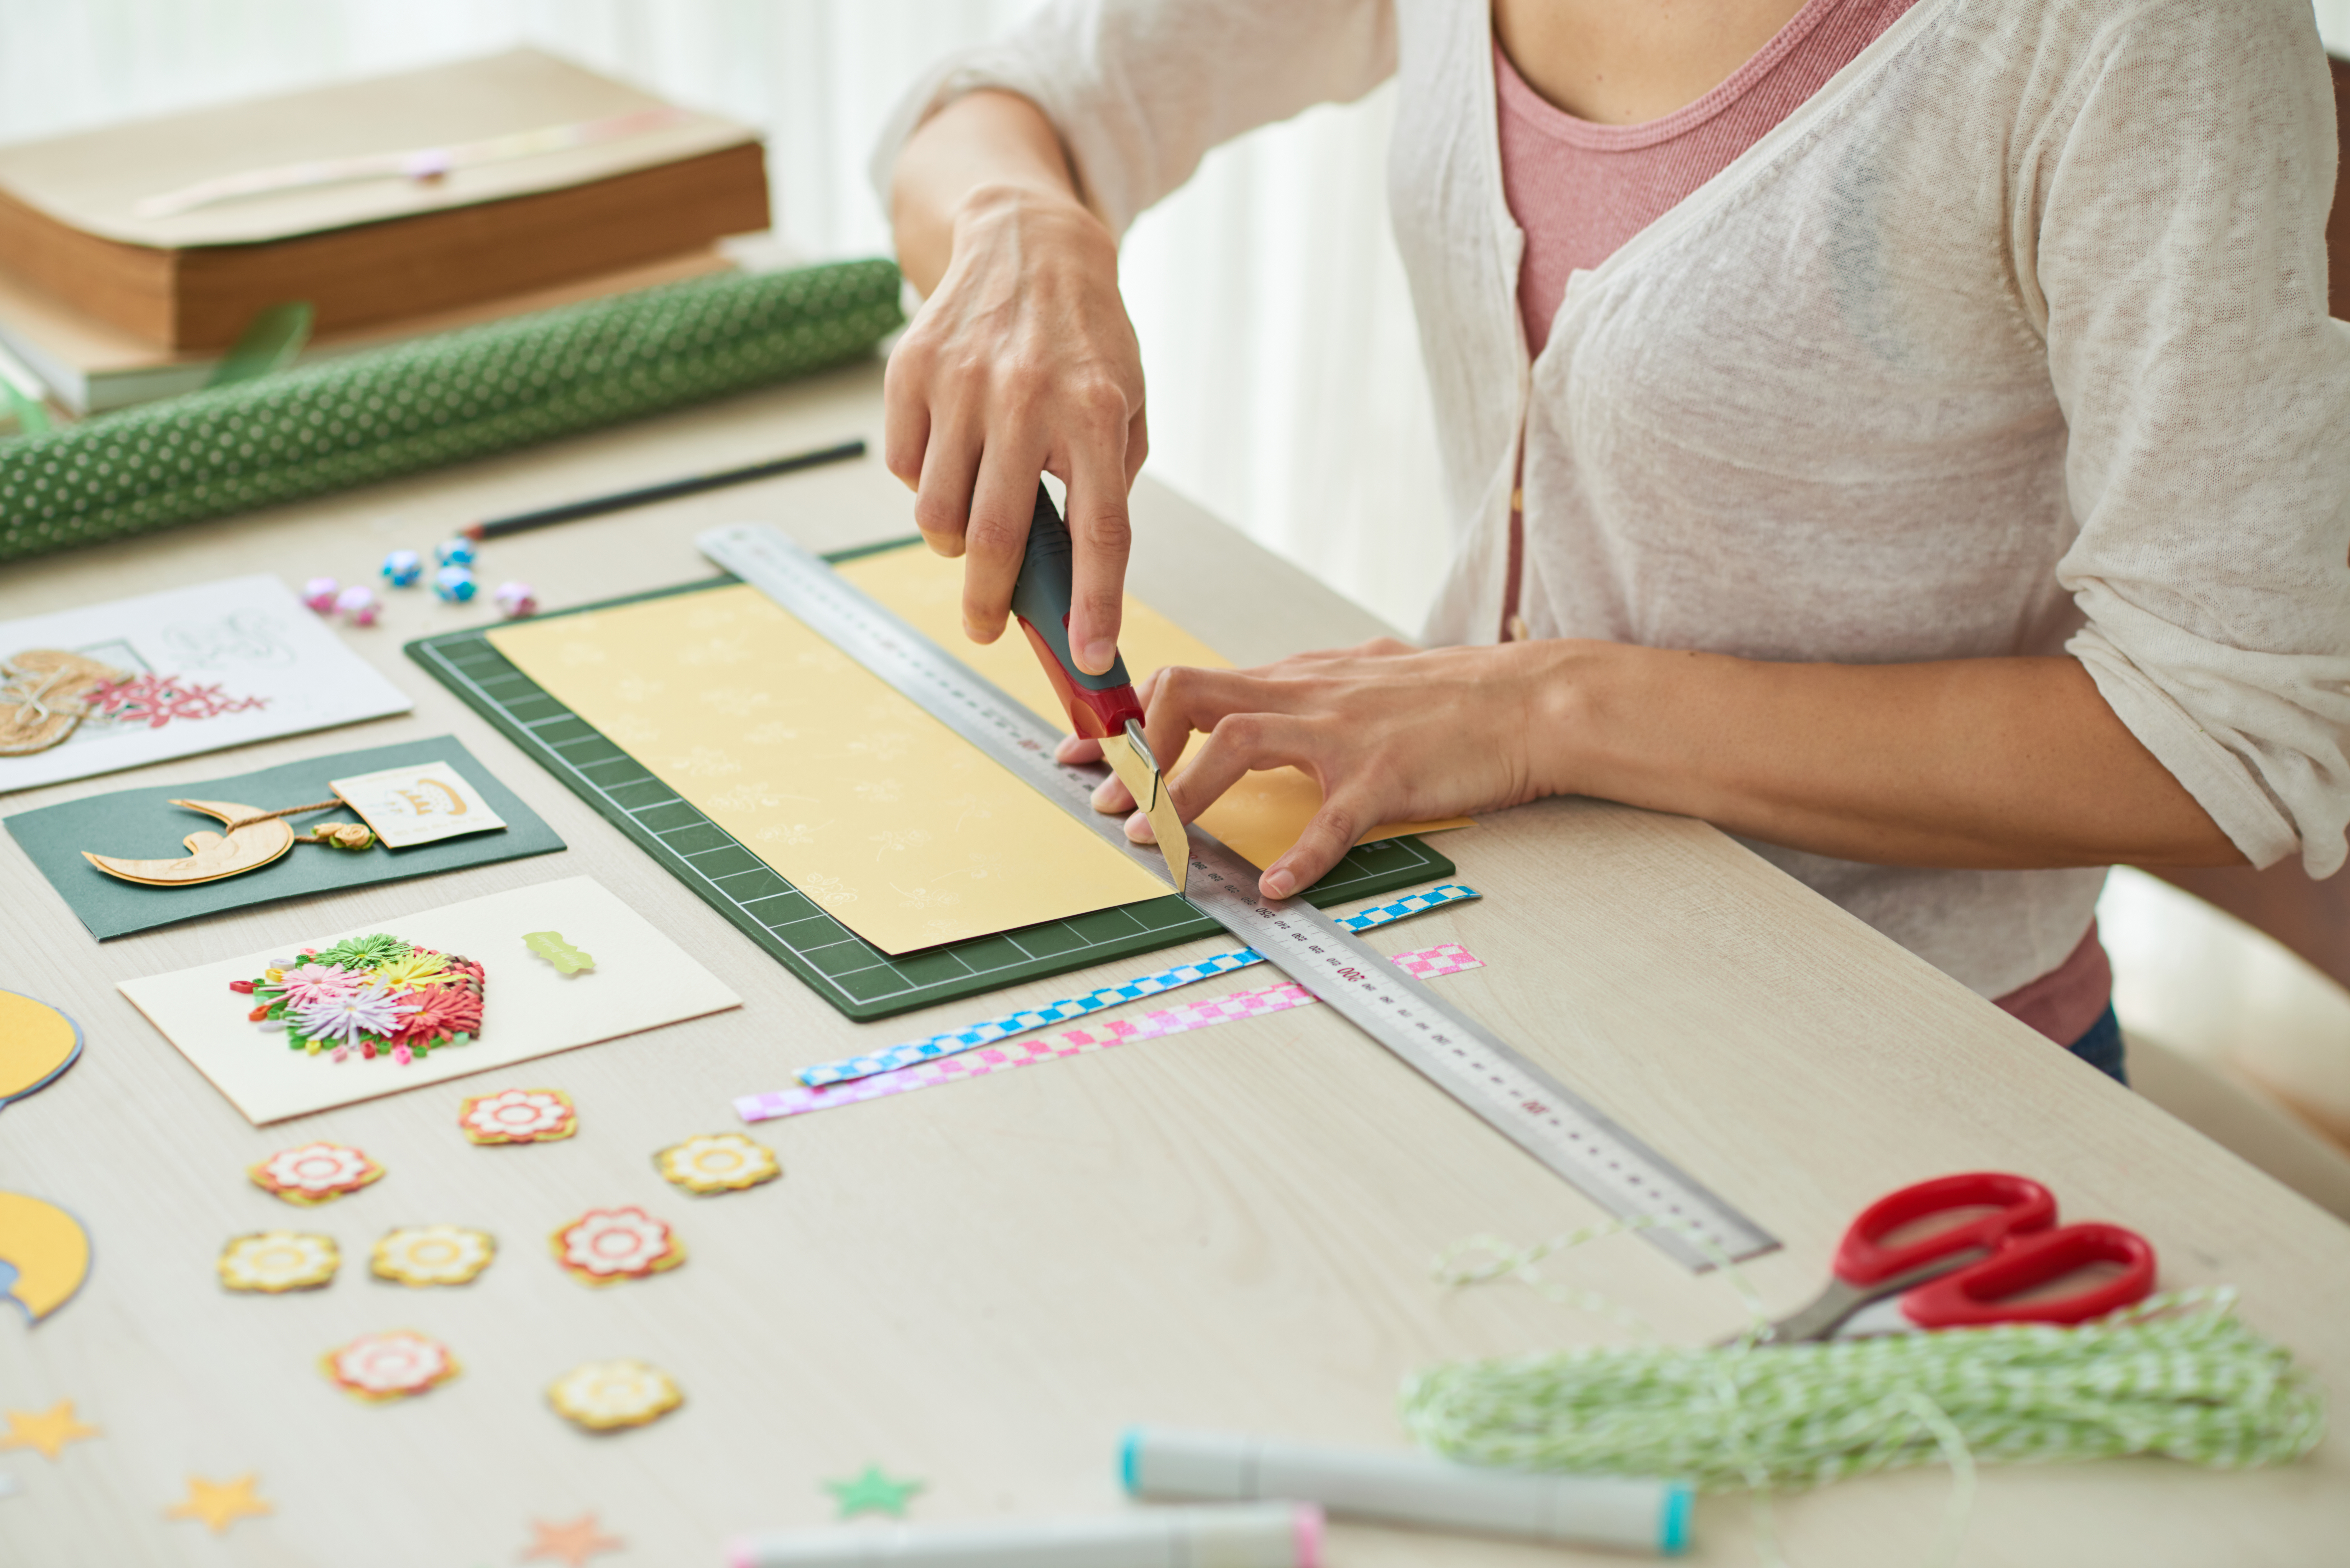 Creative woman sitting at wooden table and making greeting cards for her friends, scrapbooking items lying on surface